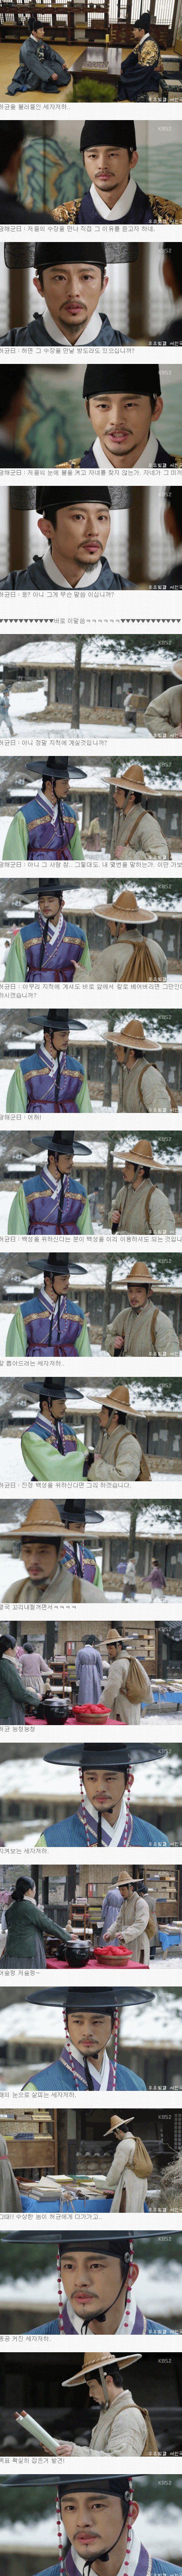 episode 18 captures for the Korean drama 'The King's Face'